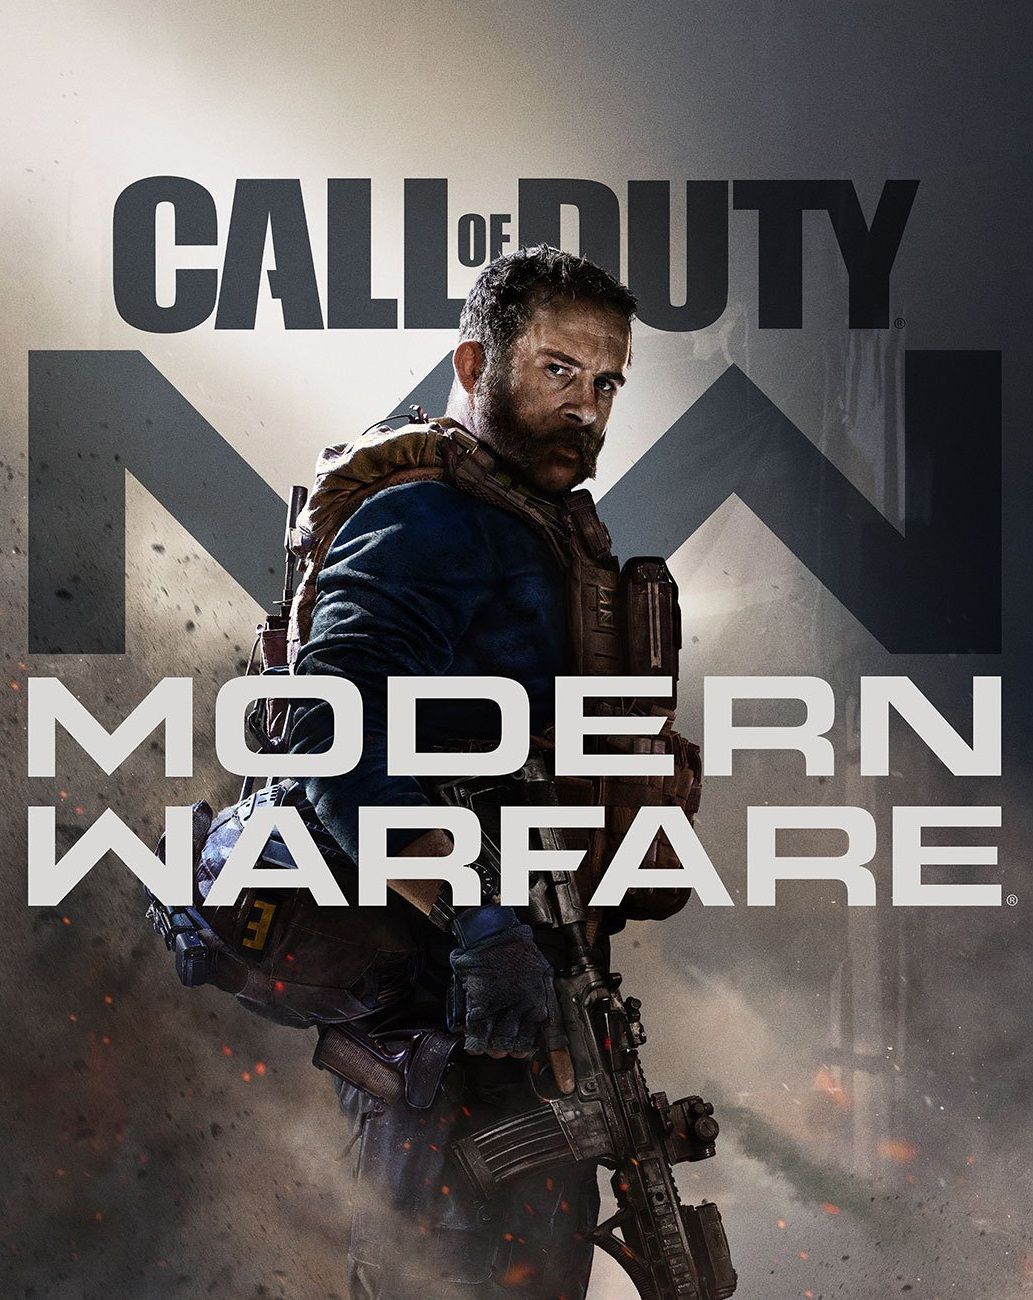 Call of Duty Modern Warfare All Editions and PreOrder Bonuses